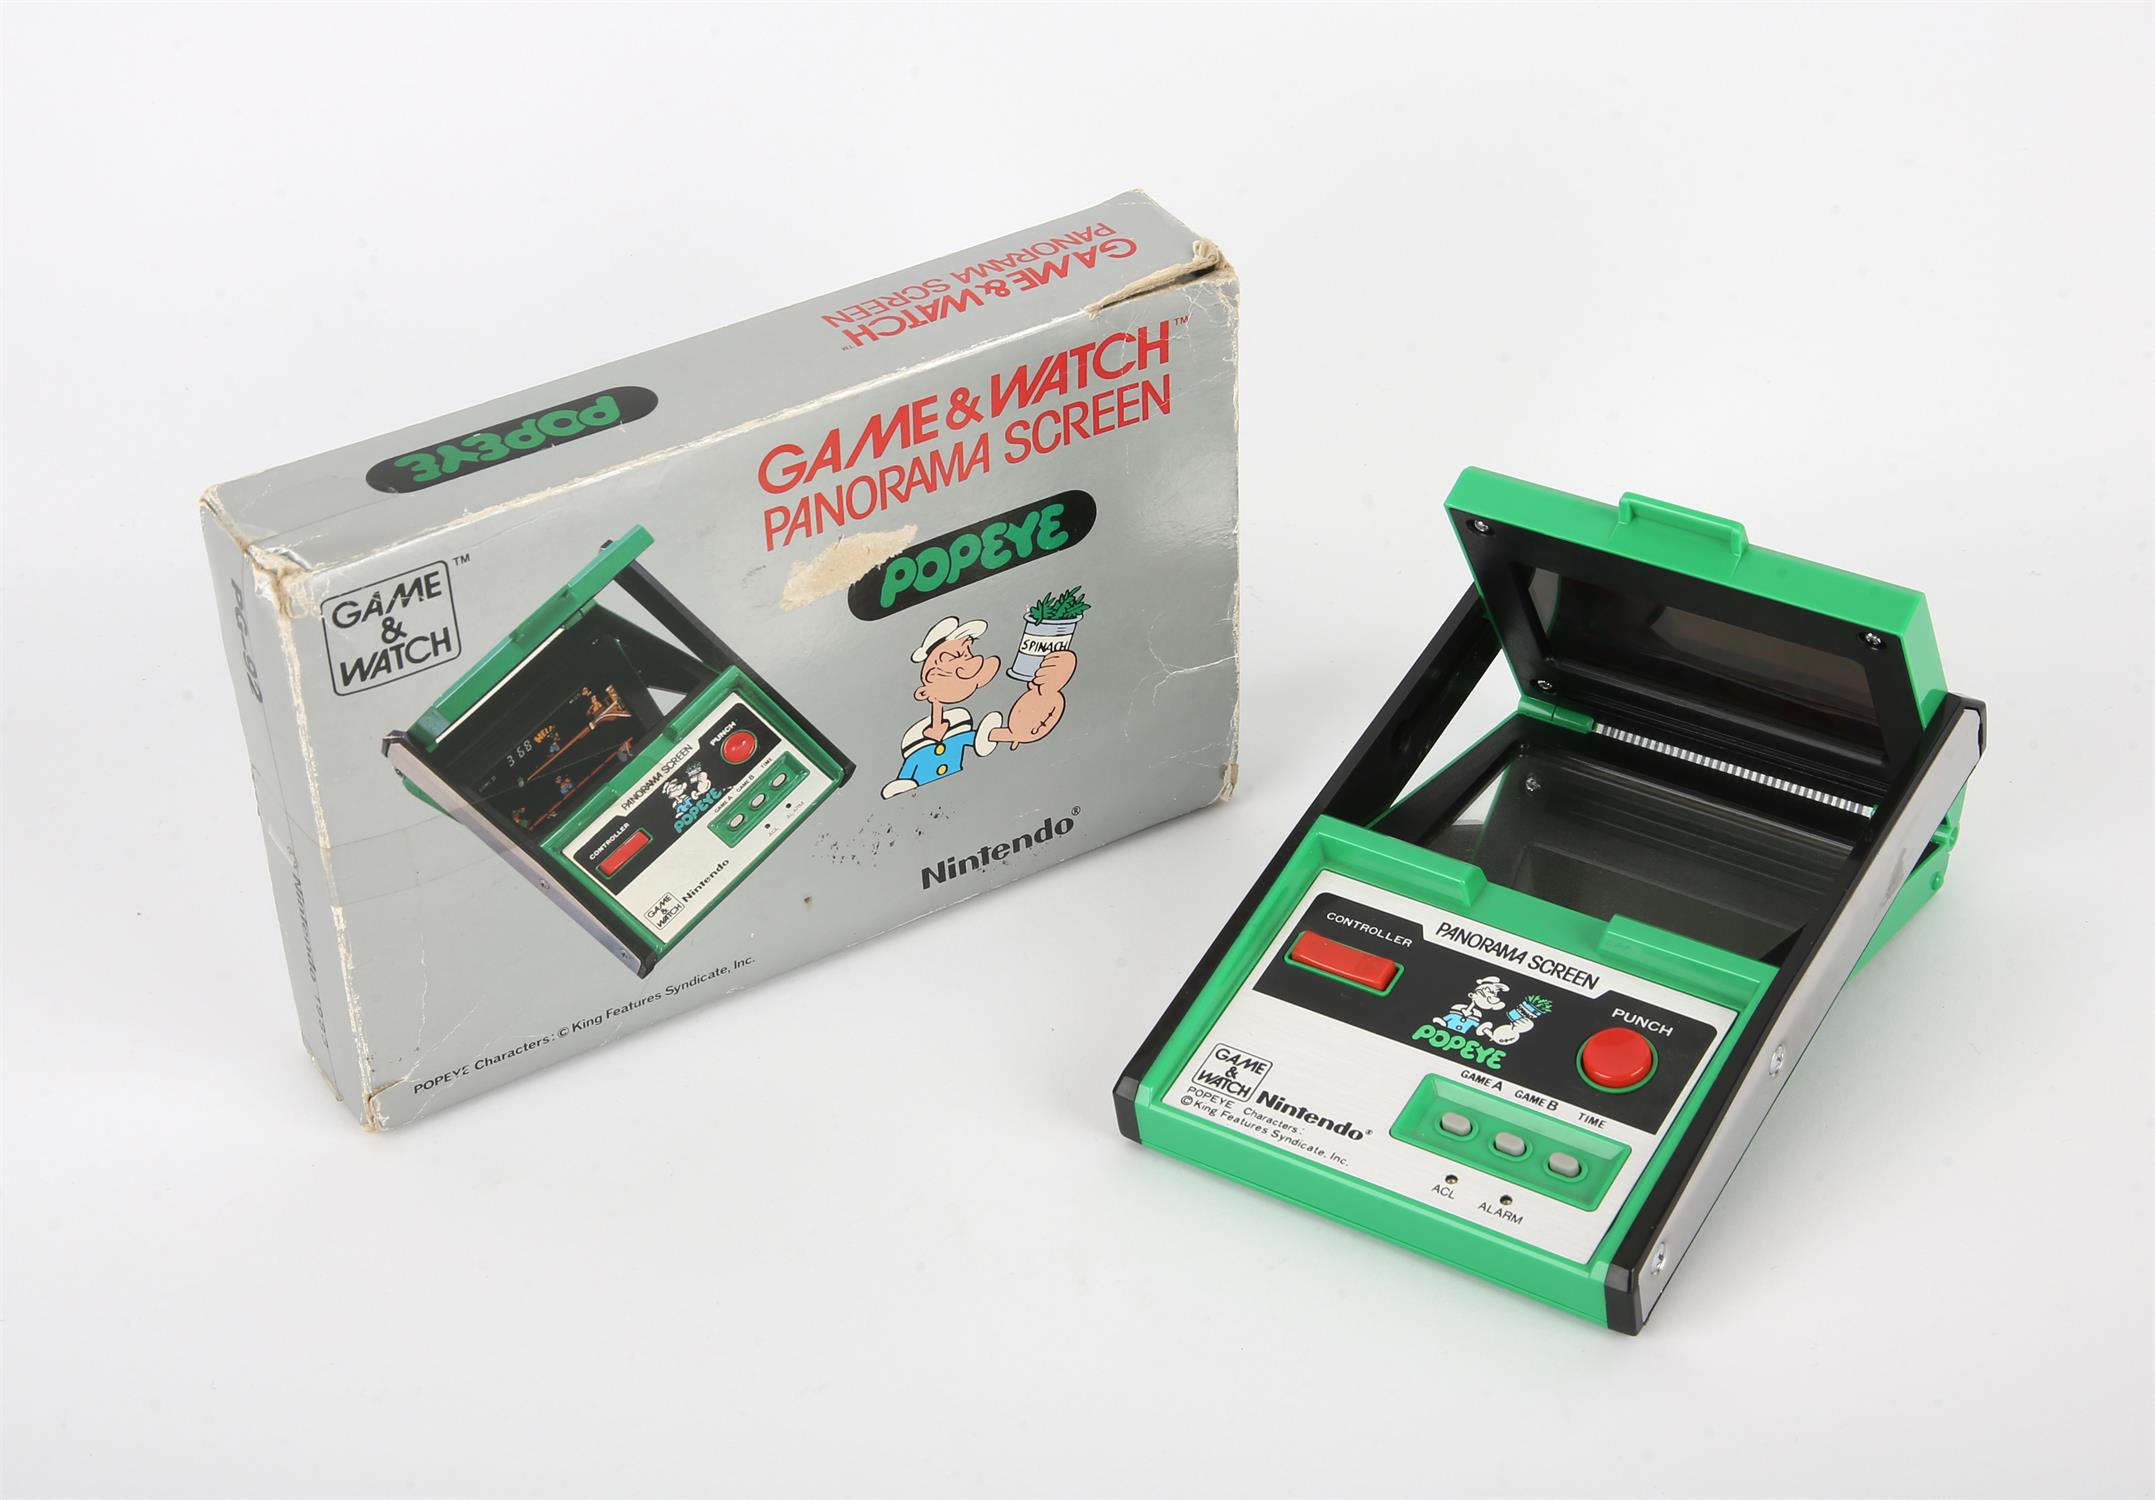 Nintendo Game & Watch Popeye [PG-92] handheld console from 1983 (complete and boxed).